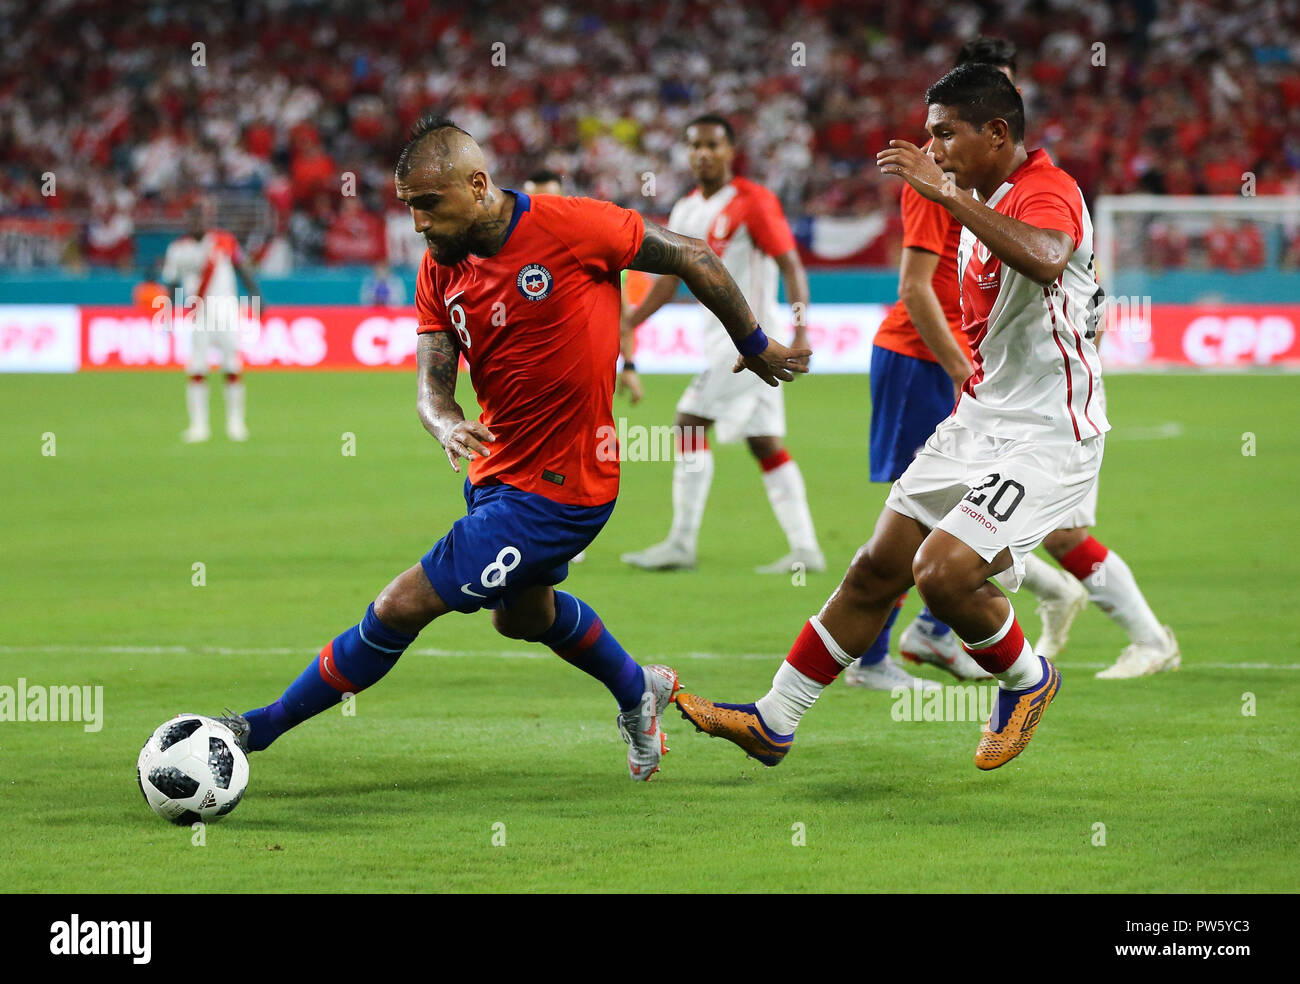 Miami Gardens, Florida, USA. 12th Oct, 2018. Chile midfielder ARTURO VIDAL (8) moves the ball past Peru midfielder EDISON FLORES (20) during an international friendly match between the Peru and Chile national soccer teams, at the Hard Rock Stadium in Miami Gardens, Florida. Credit: Mario Houben/ZUMA Wire/Alamy Live News Stock Photo